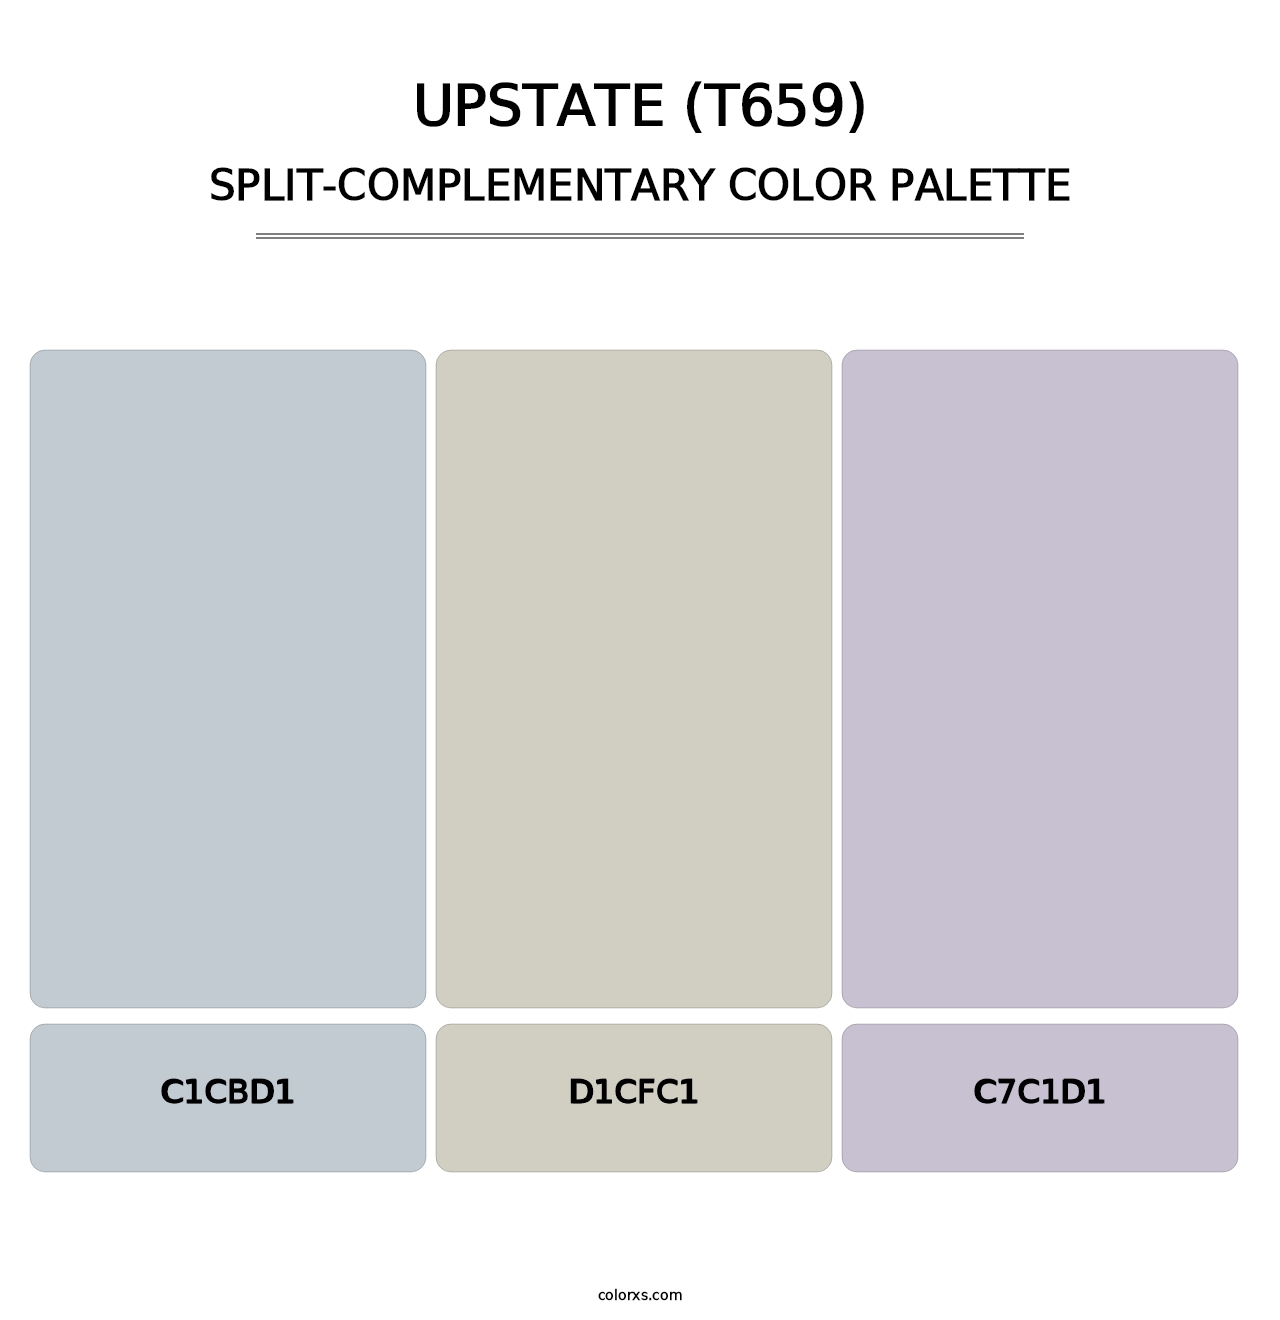 Upstate (T659) - Split-Complementary Color Palette